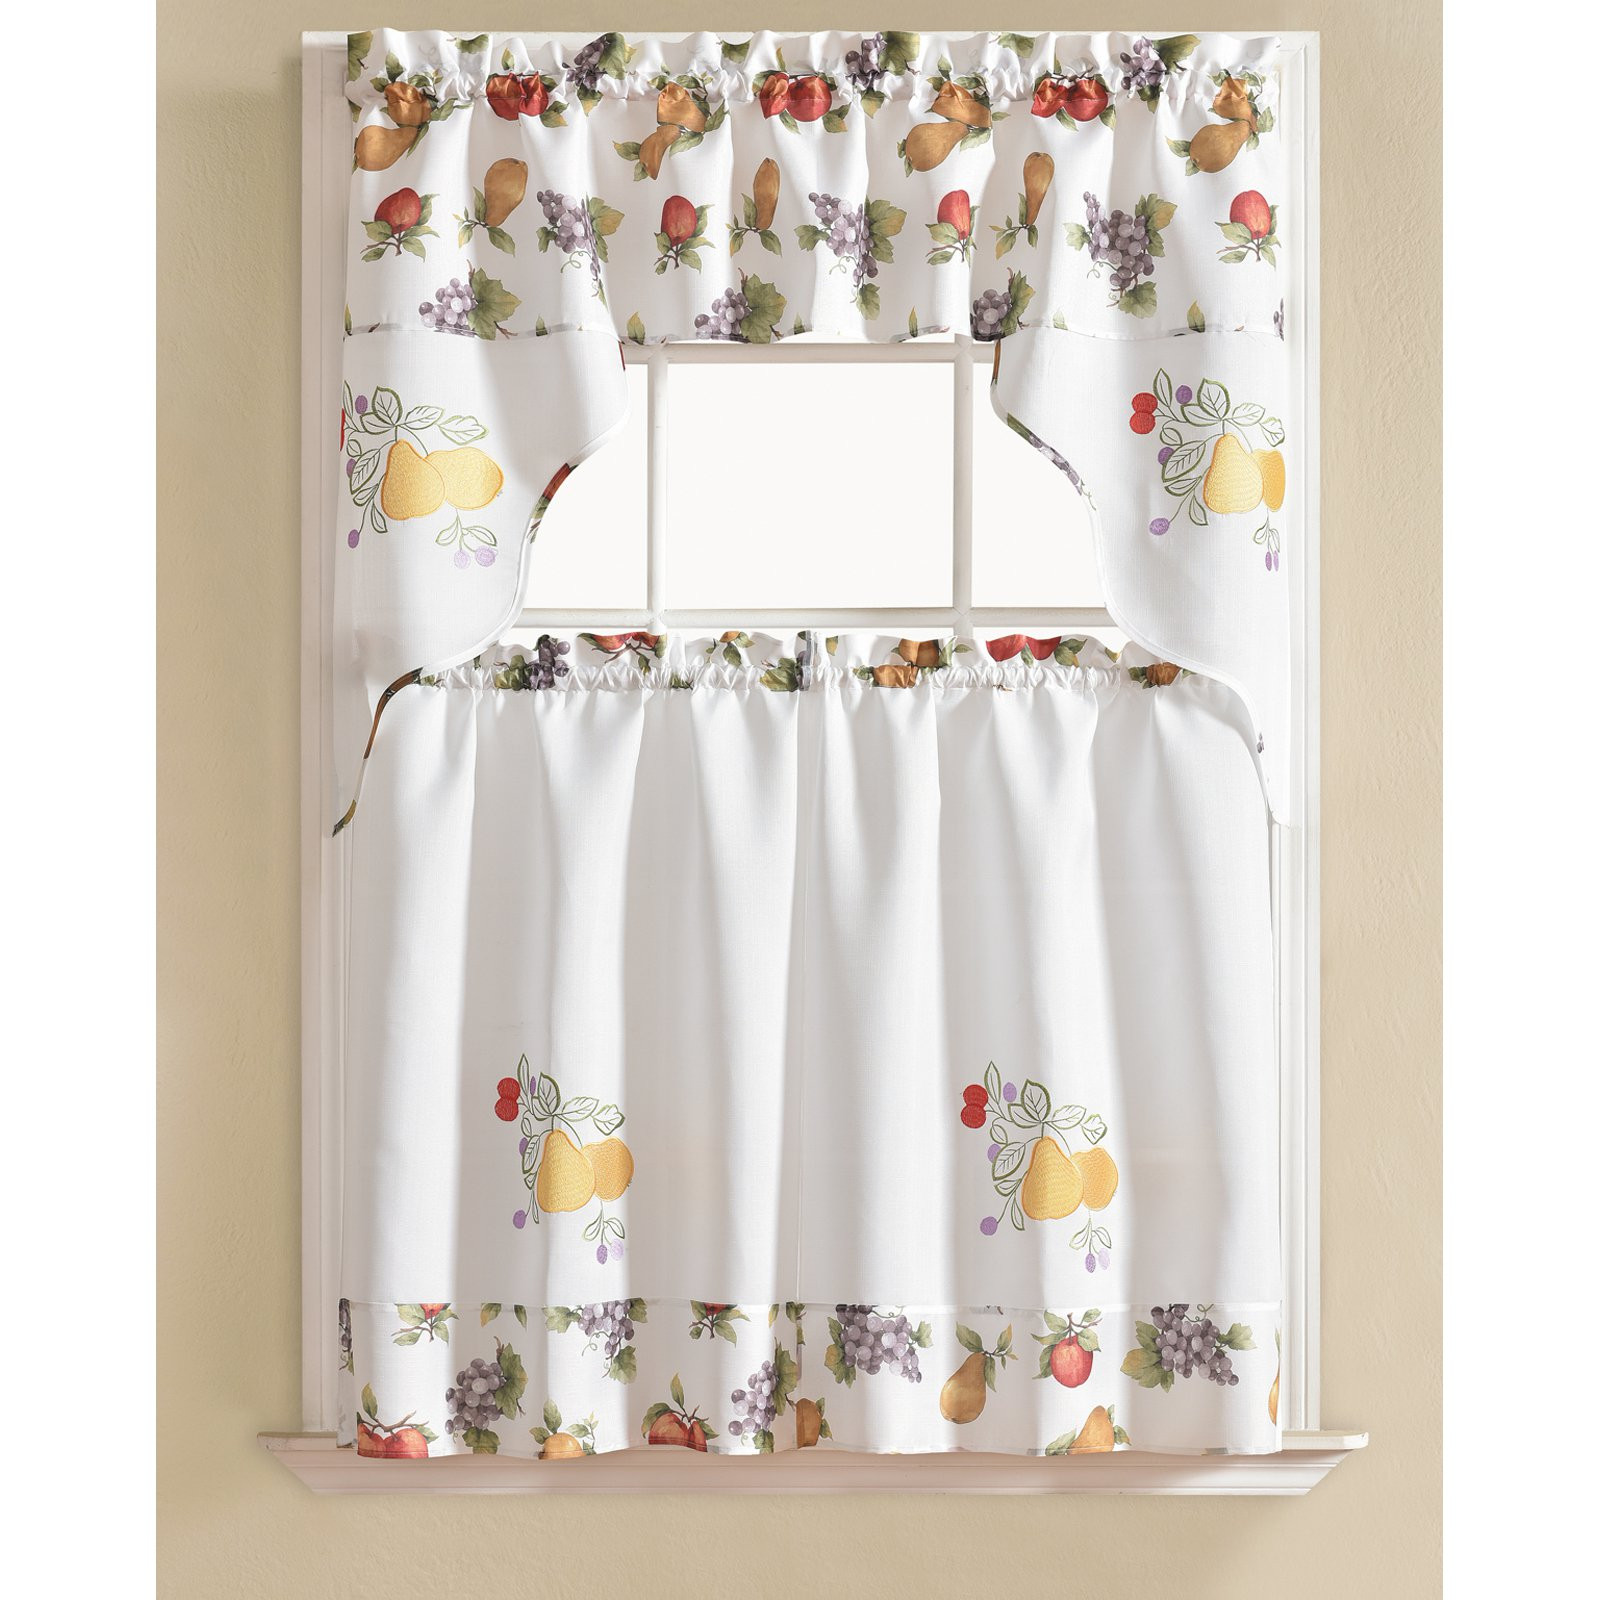 Walmart Com Kitchen Curtains
 Urban Embroidered Pear Tier and Valance Kitchen Curtain